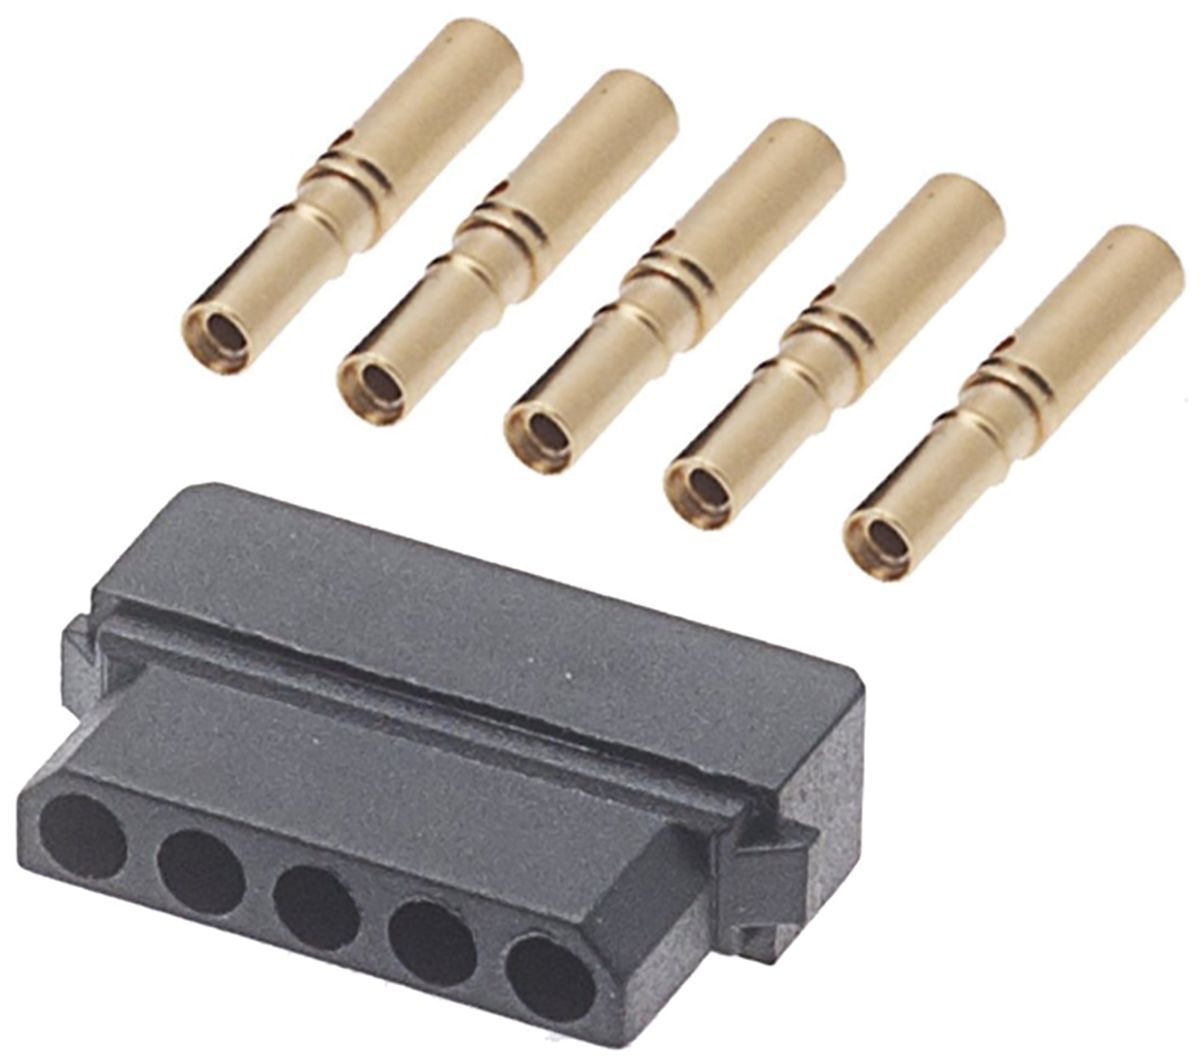 Datamate Connector Kit Containing 5 way SIL Female Shell, Crimps